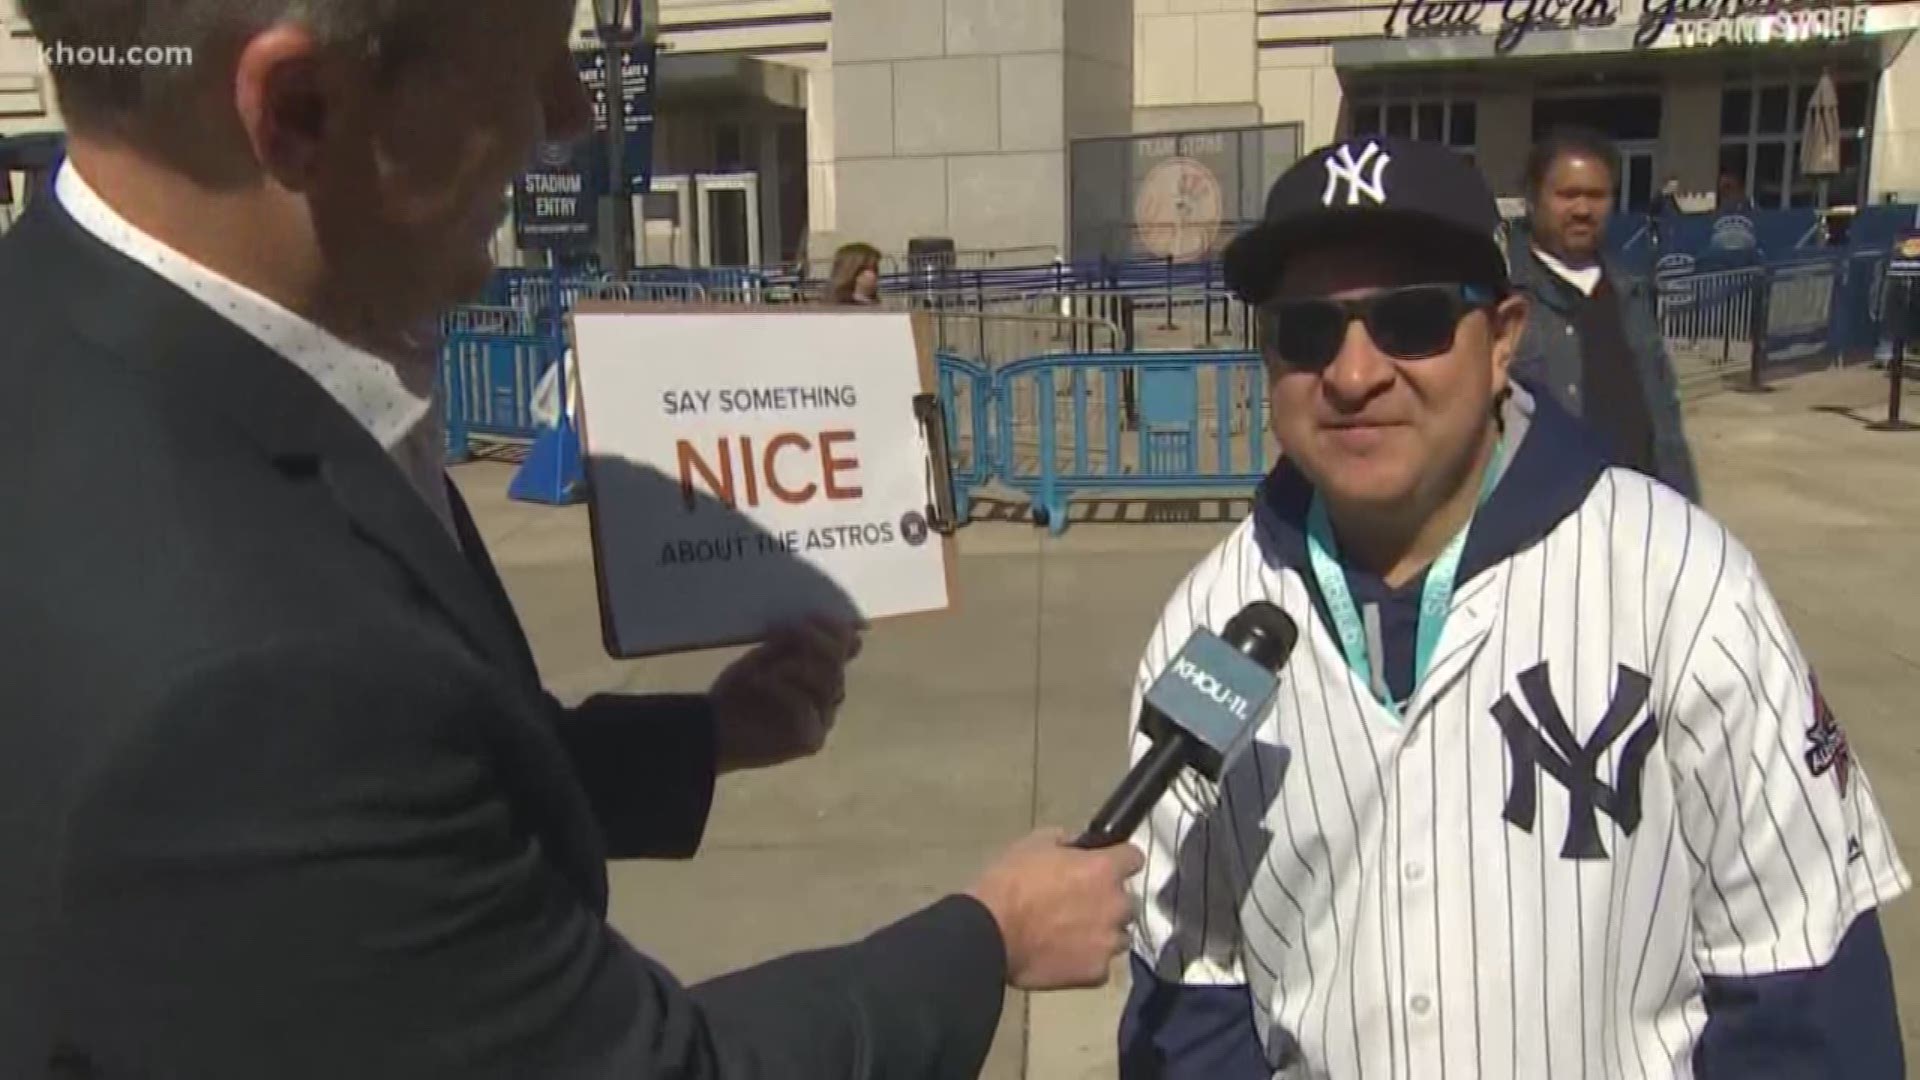 Can New Yorkers say anything nice about the Astros? KHOU 11 Sports' Jason Bristol finds out.